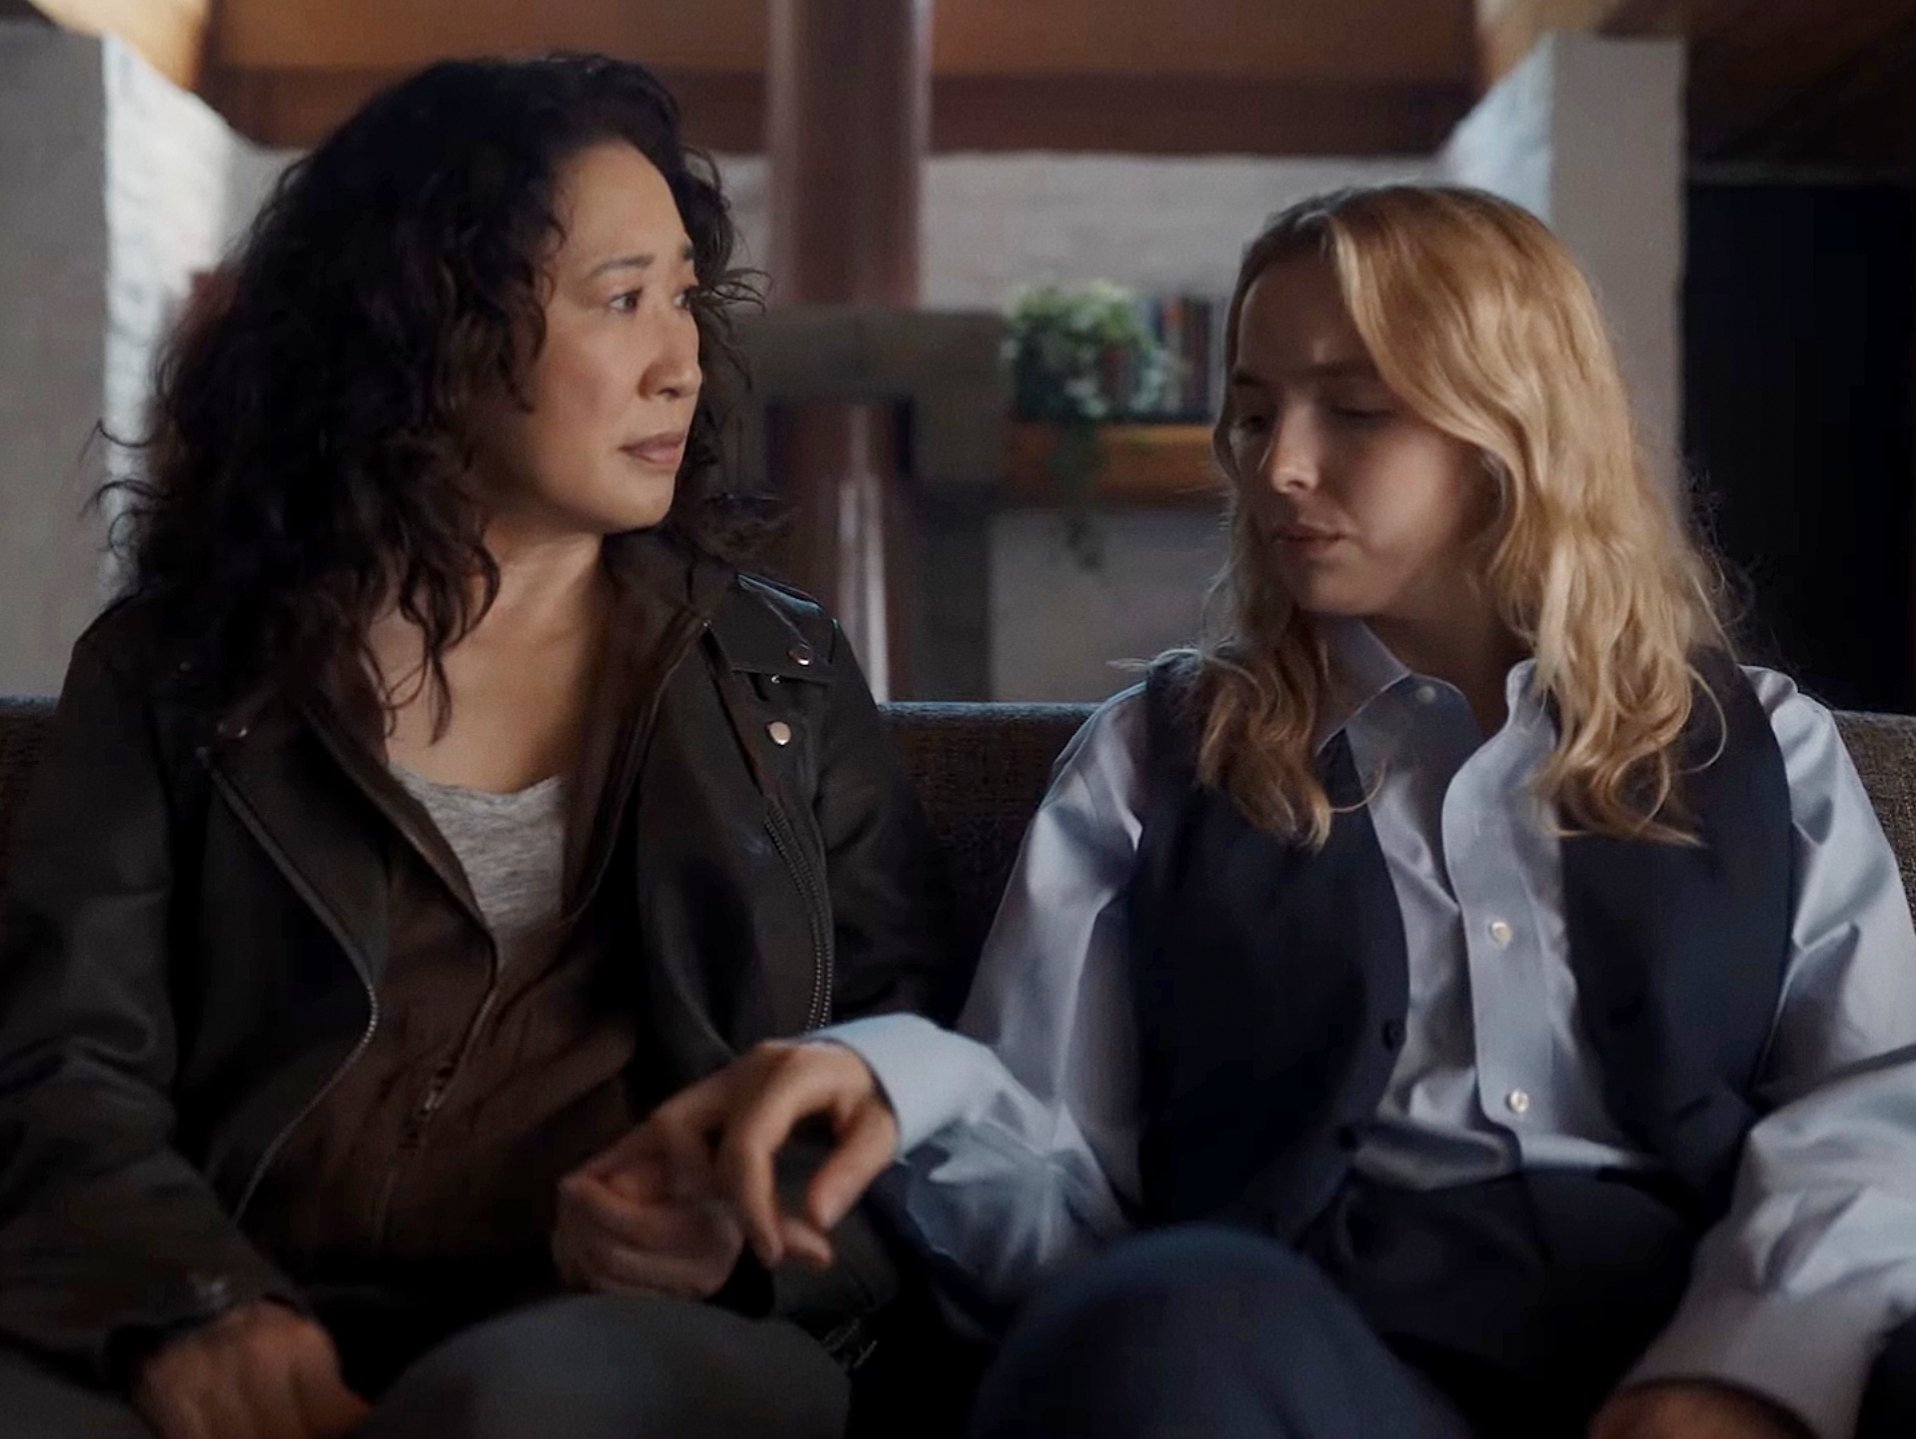 'Killing Eve' 4x03 Review: "A Rainbow in Beige Boots"